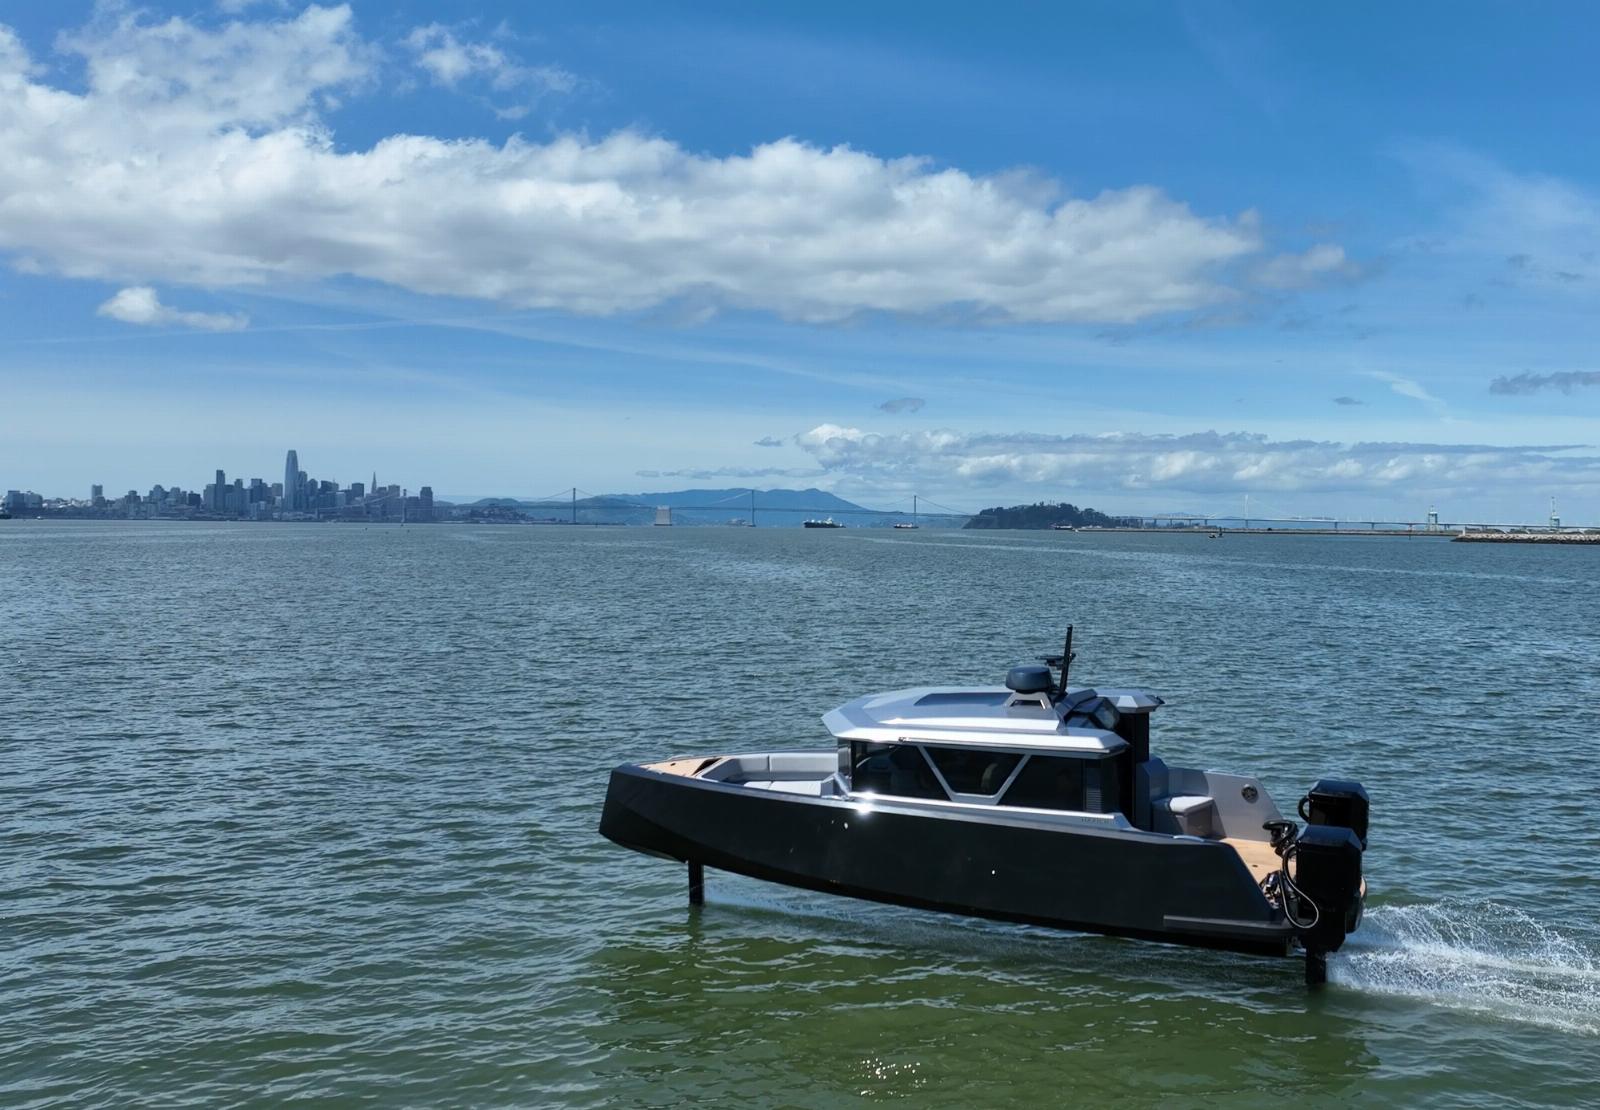 Navier’s hydrofoiling electric boat cruises West Coast waterways to line up first pilot programs